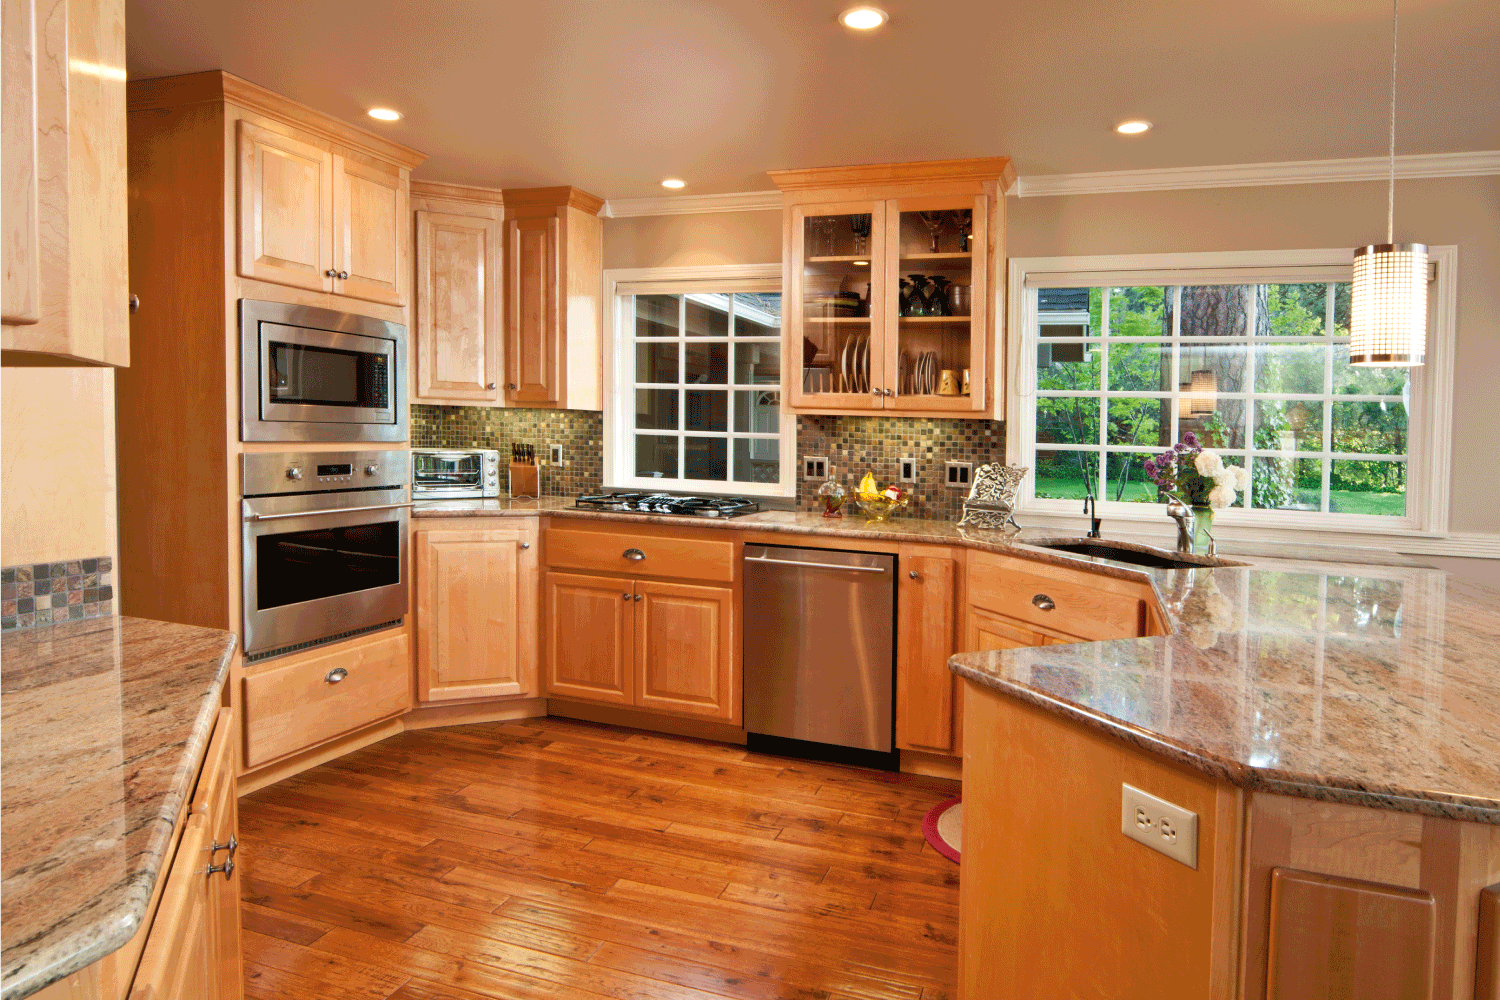 This modern kitchen gives a wide view showing the wood floor and cabinets. classic wood look